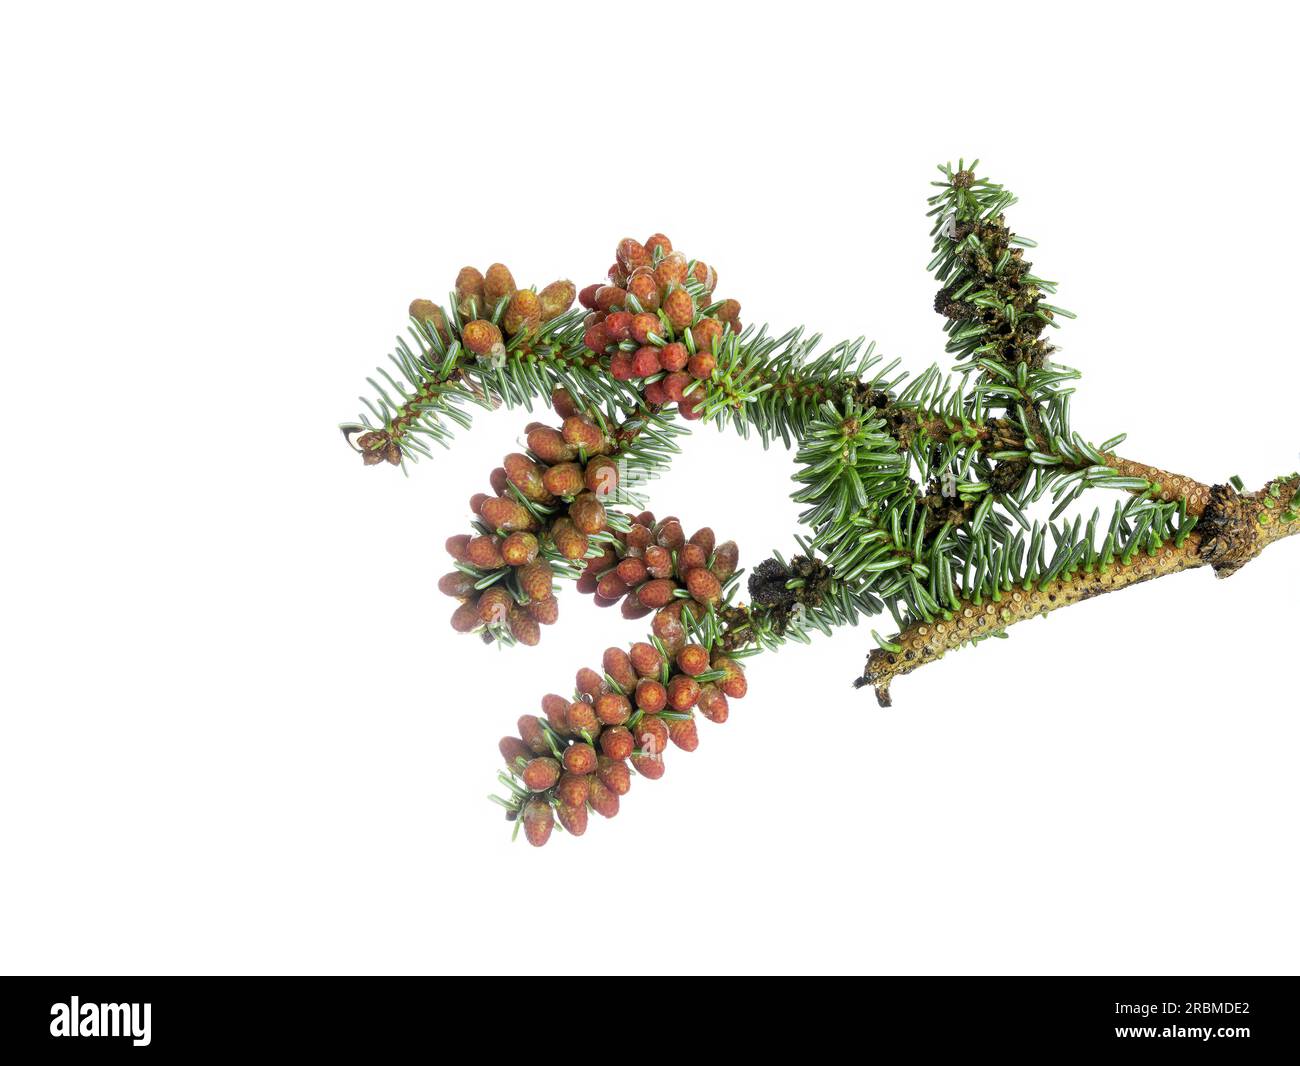 Abies fraseri, Green cones of a Fraser fir isolated on white background studio shot Stock Photo